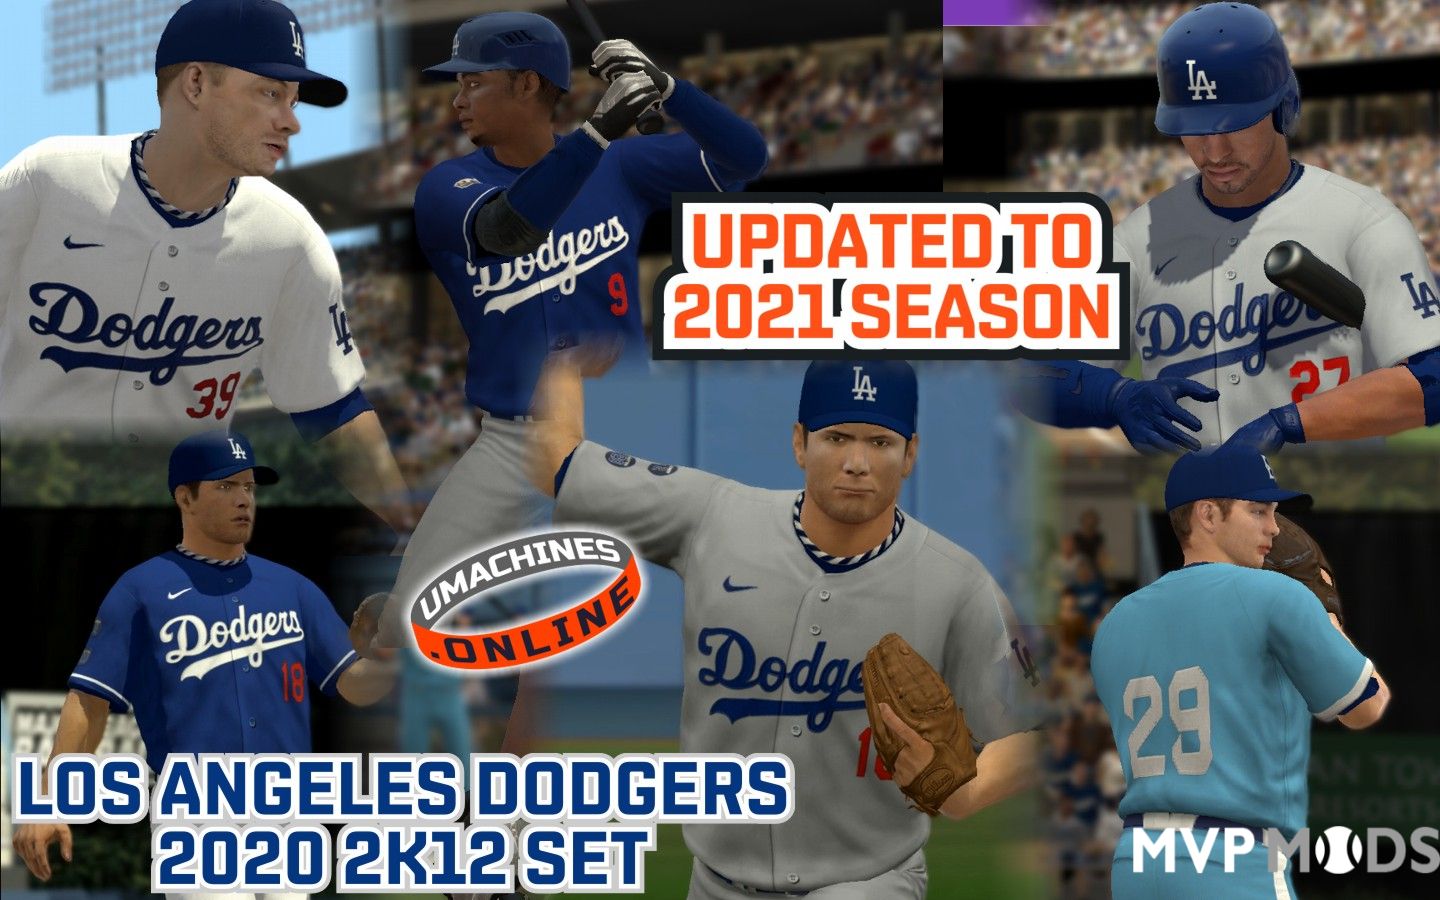 Los Angeles Dodgers: New Uniforms, PMell2293